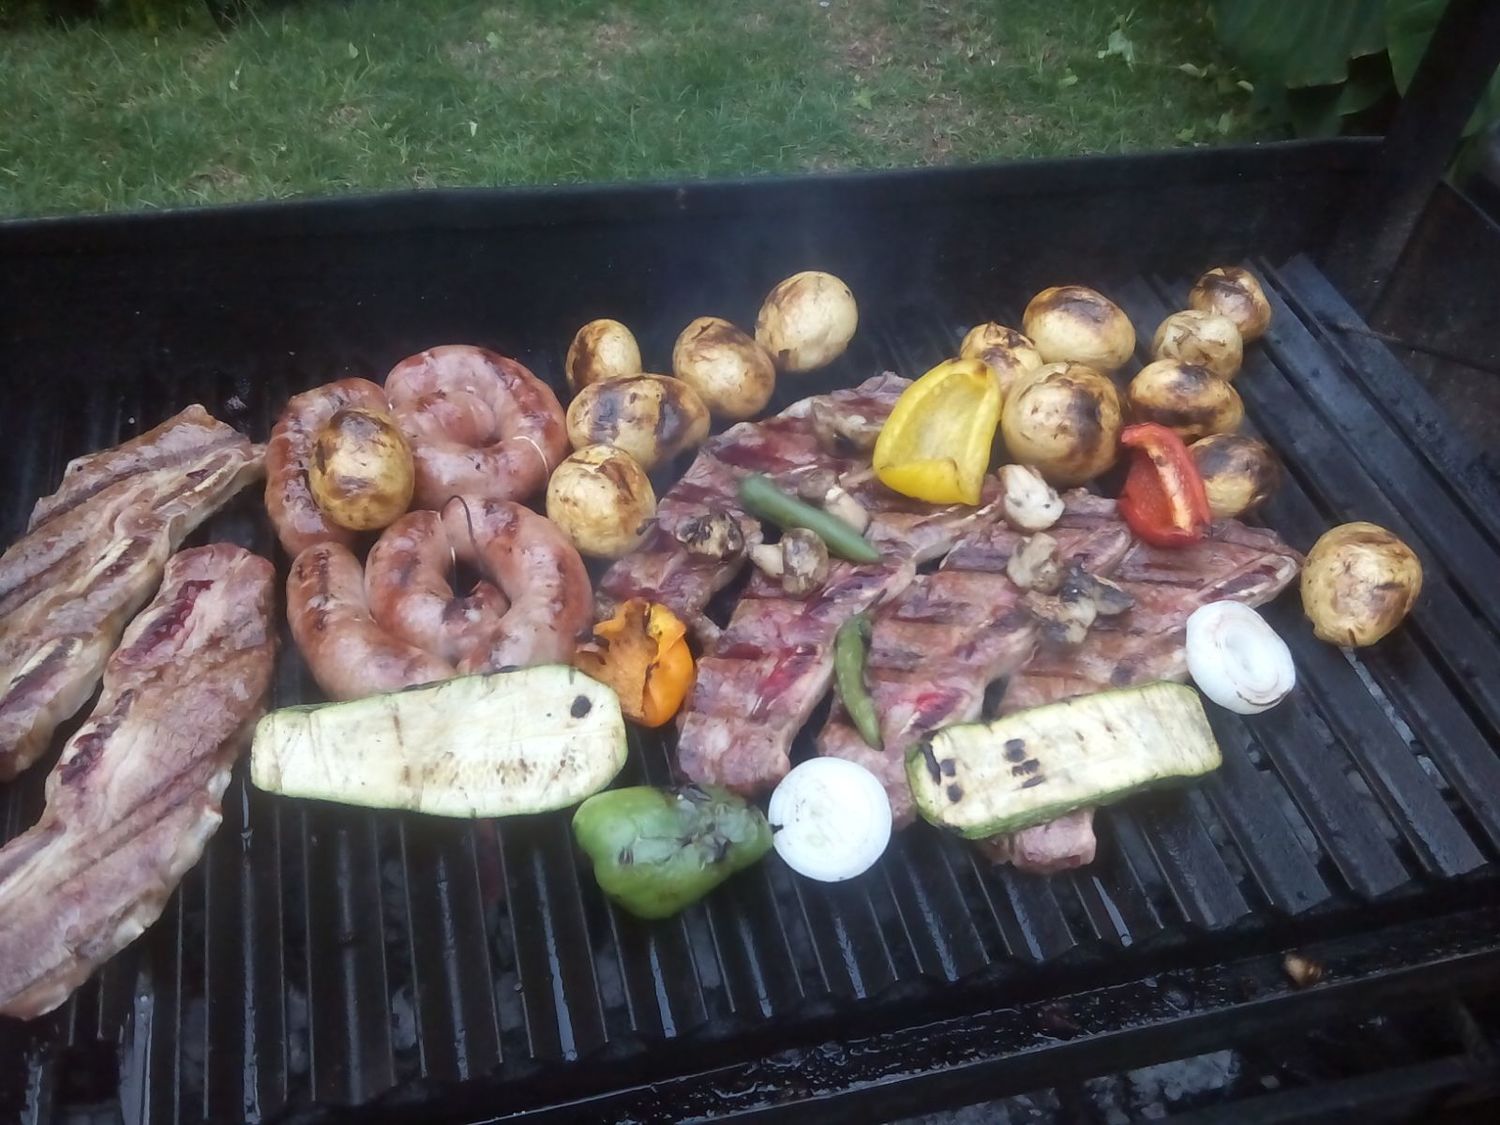 <span style="font-weight: bold;">Parrillada gourmet</span><br>